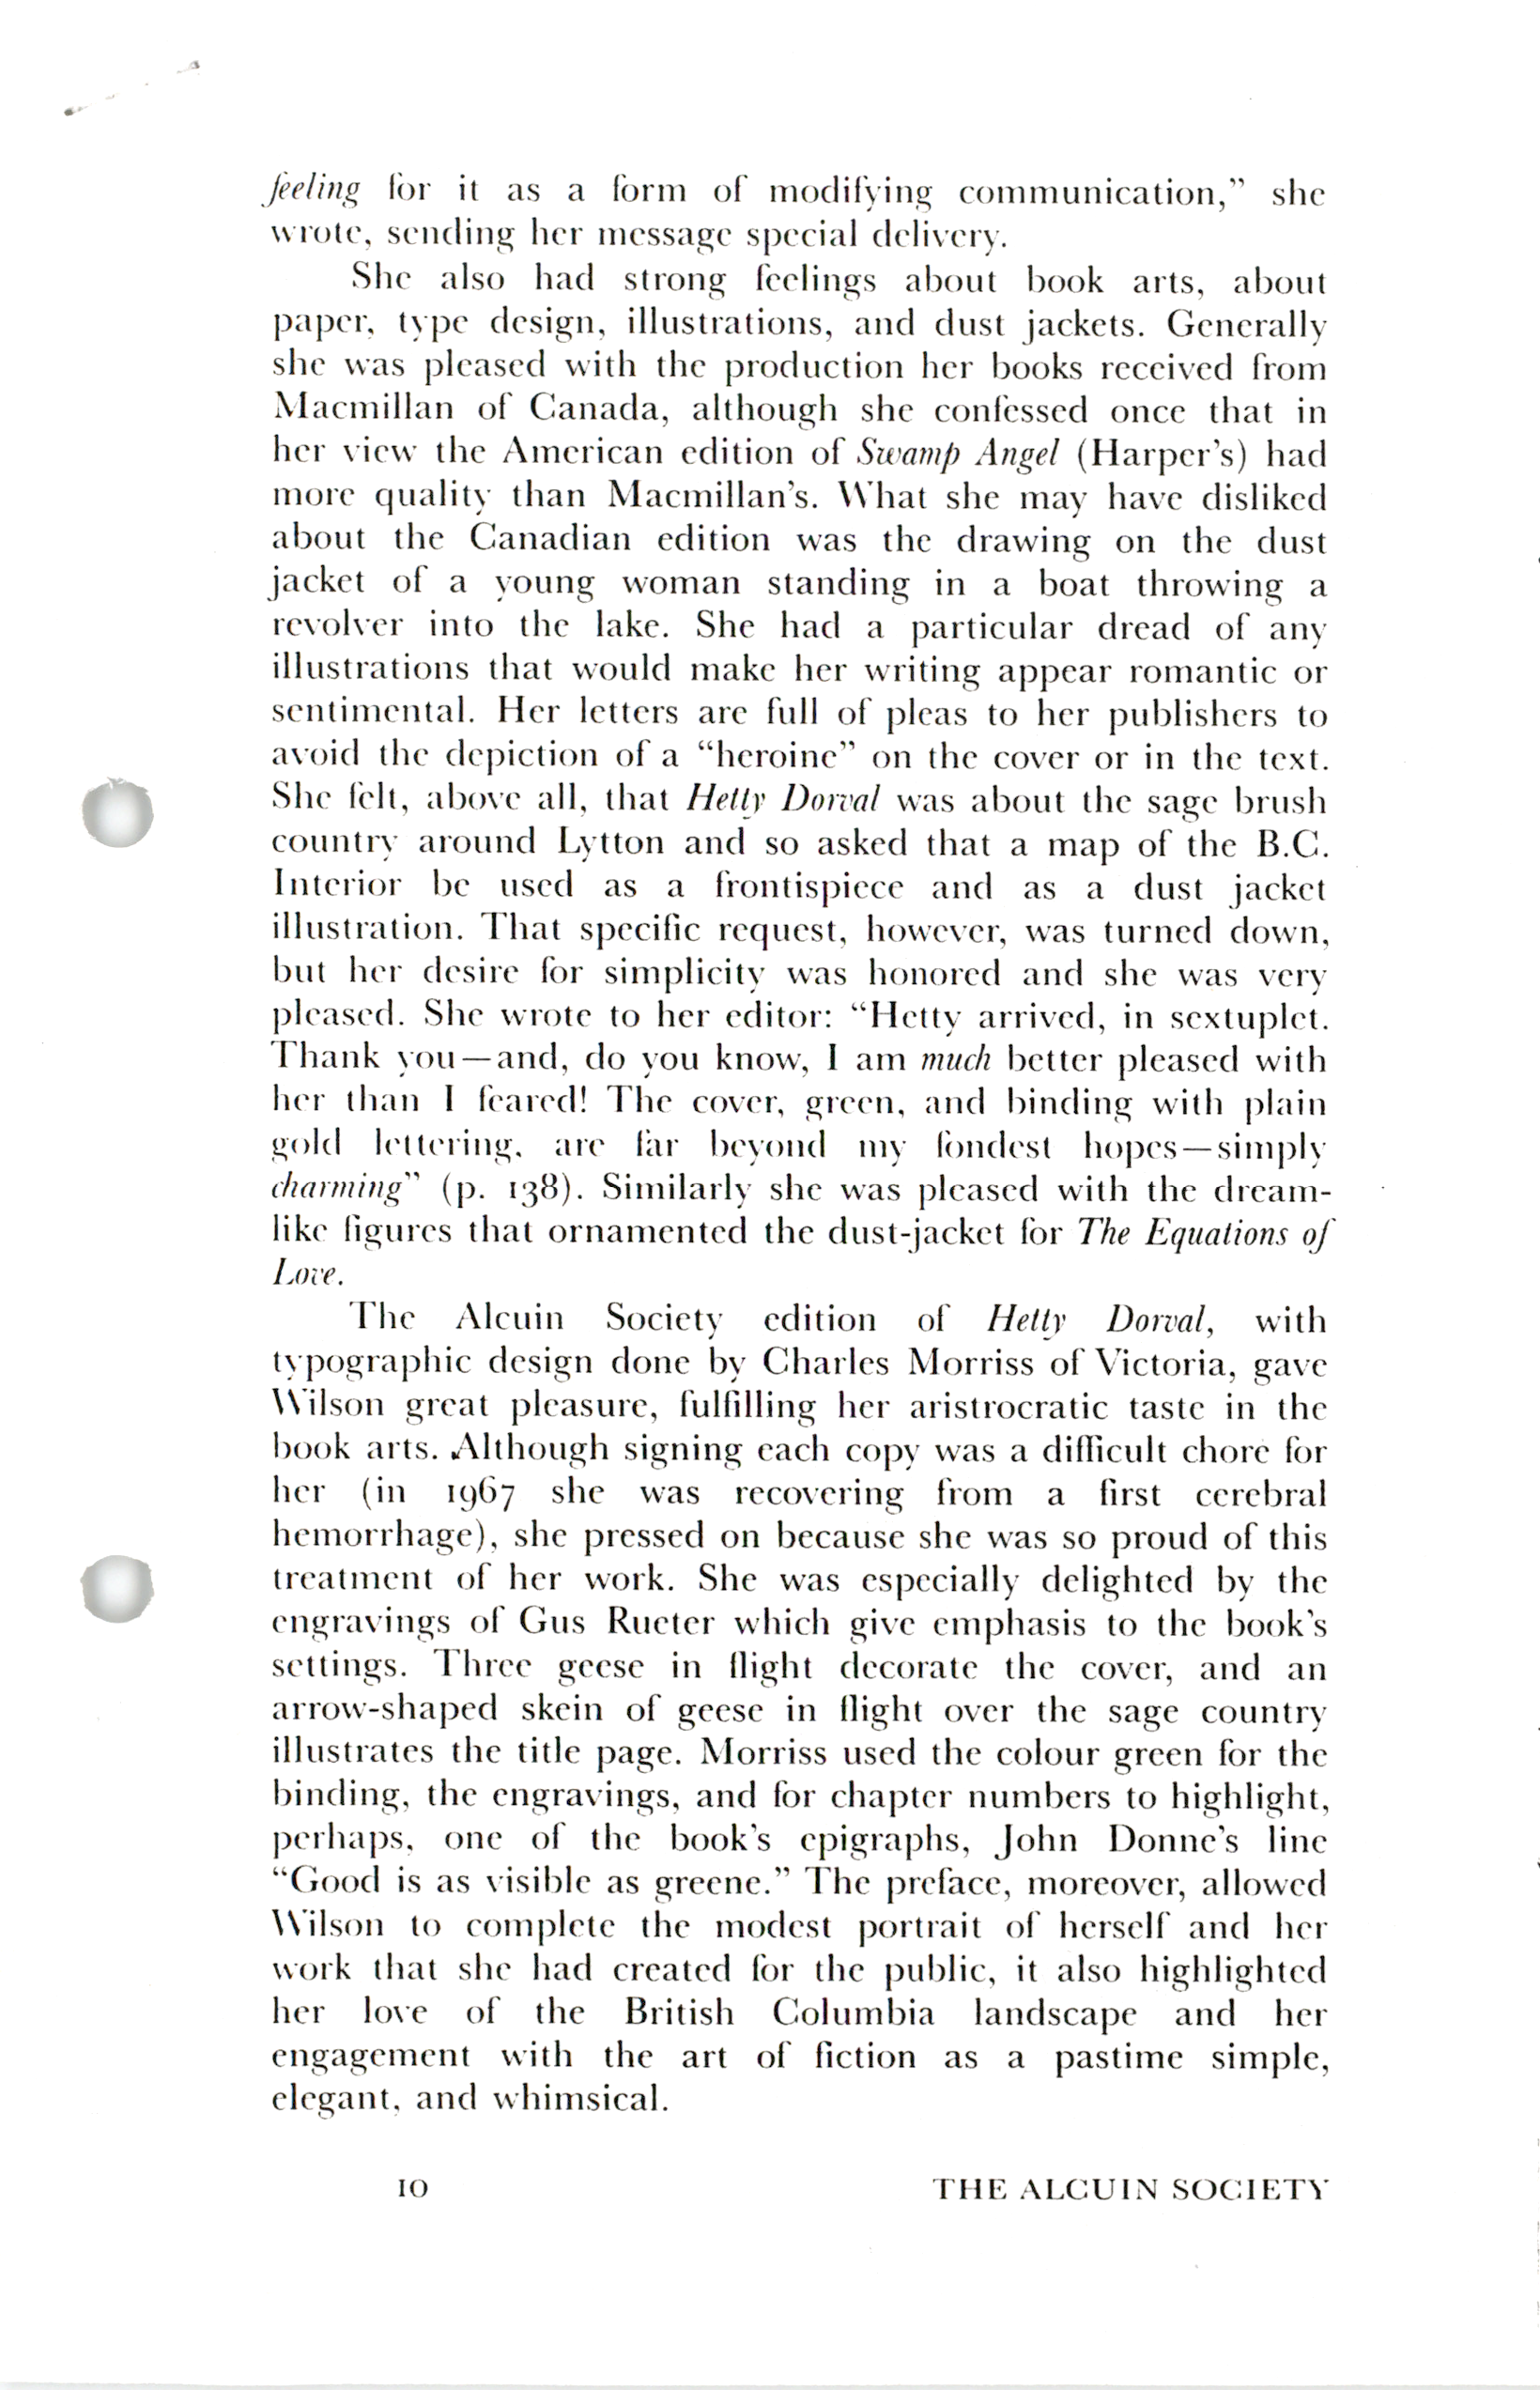 First Page of 1988 Alcuin Citations